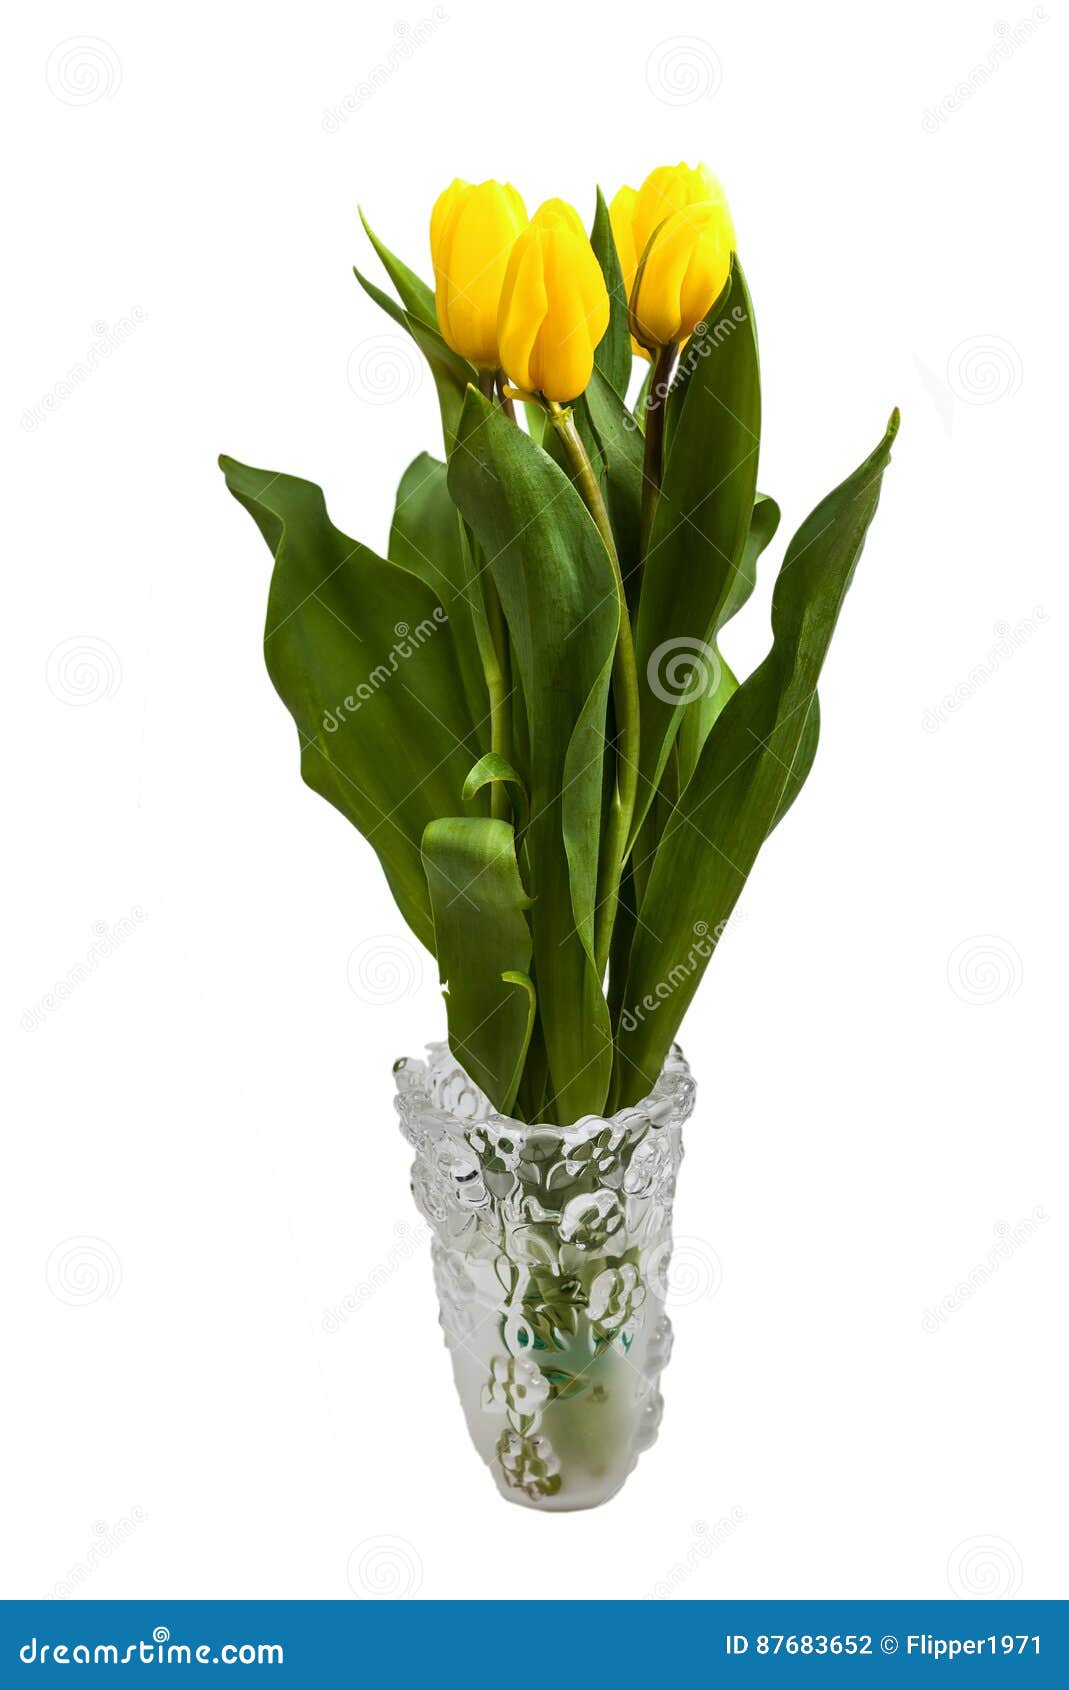 Tulips in a Vase stock photo. Image of natural, bouquet - 87683652